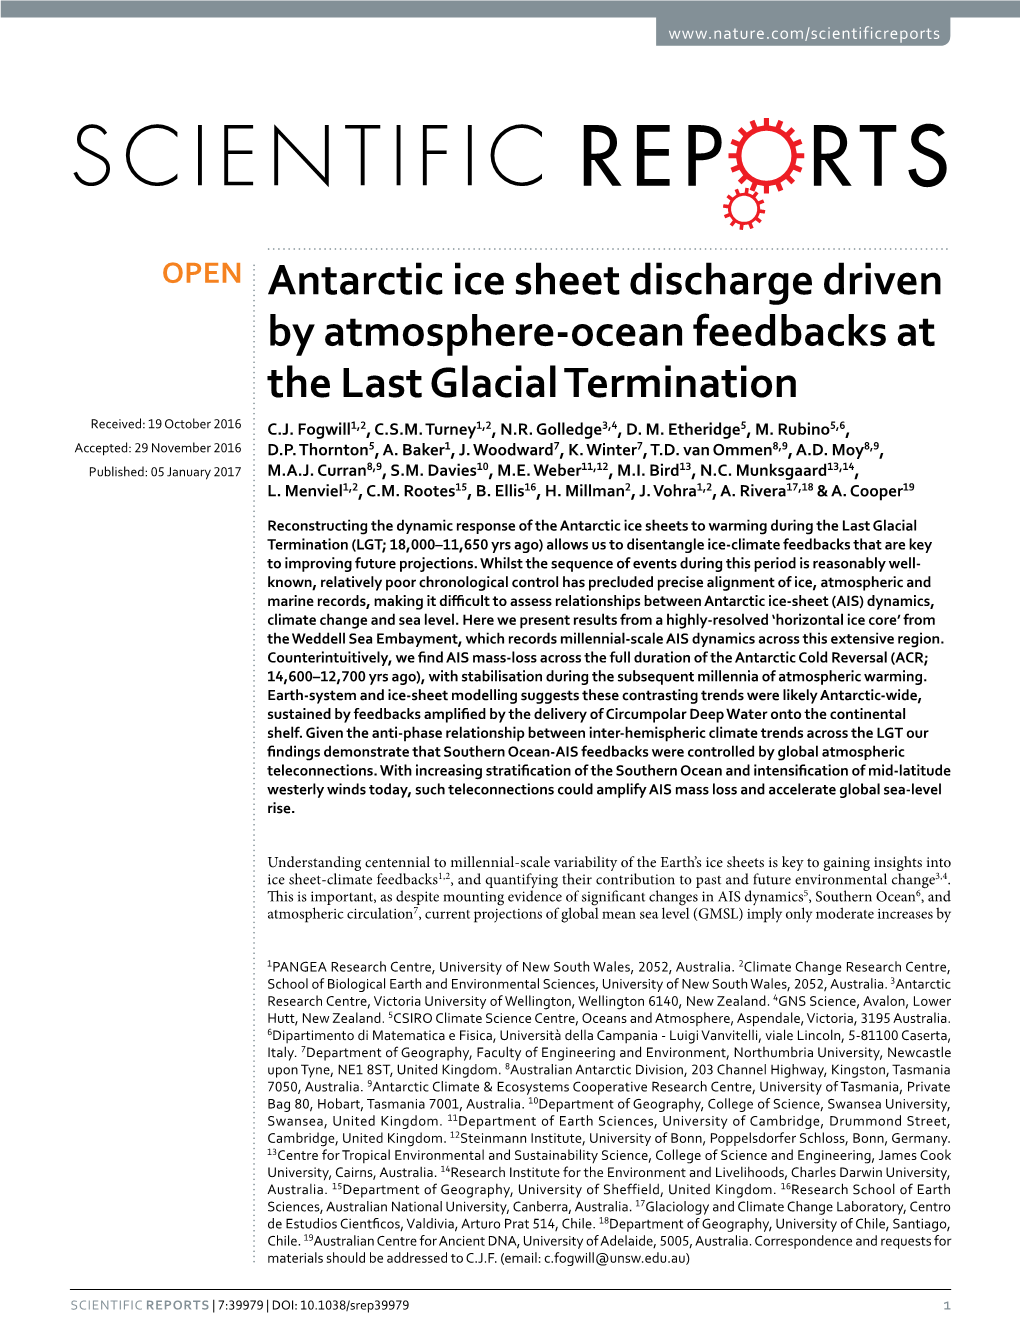 Antarctic Ice Sheet Discharge Driven by Atmosphere-Ocean Feedbacks at the Last Glacial Termination Received: 19 October 2016 C.J